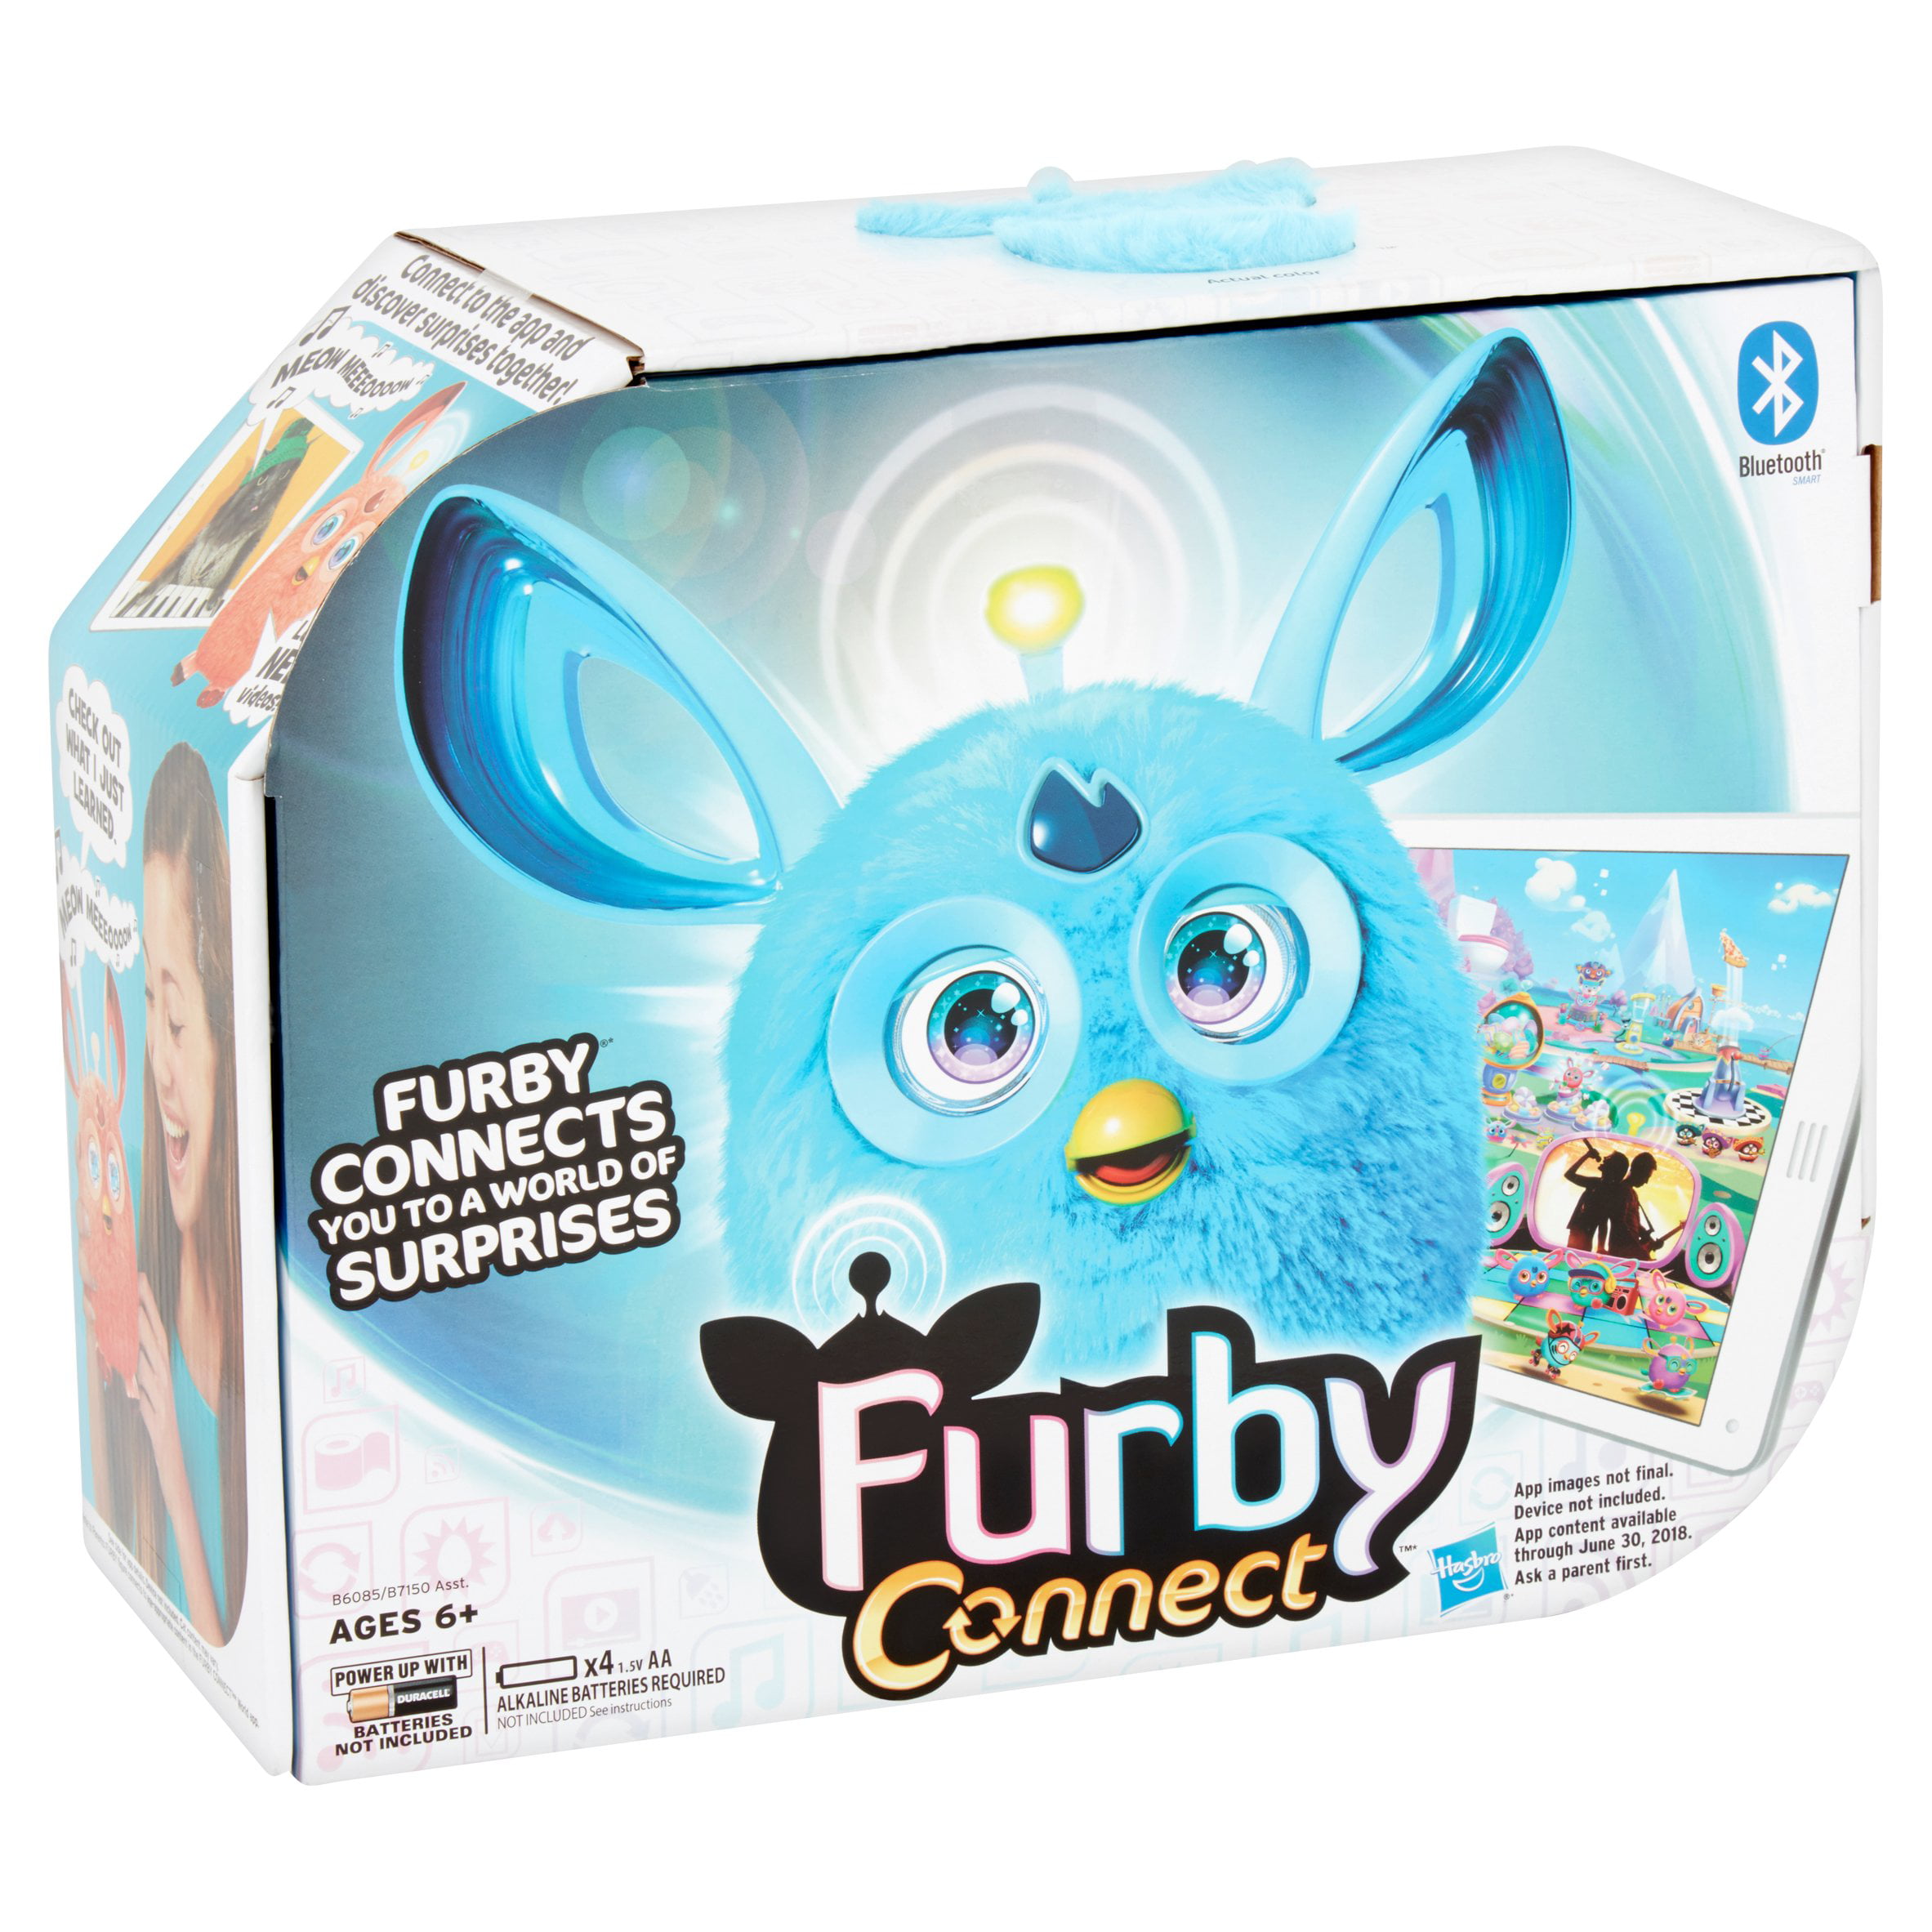 B7153 for sale online Hasbro Furby Connect Friend Toy 